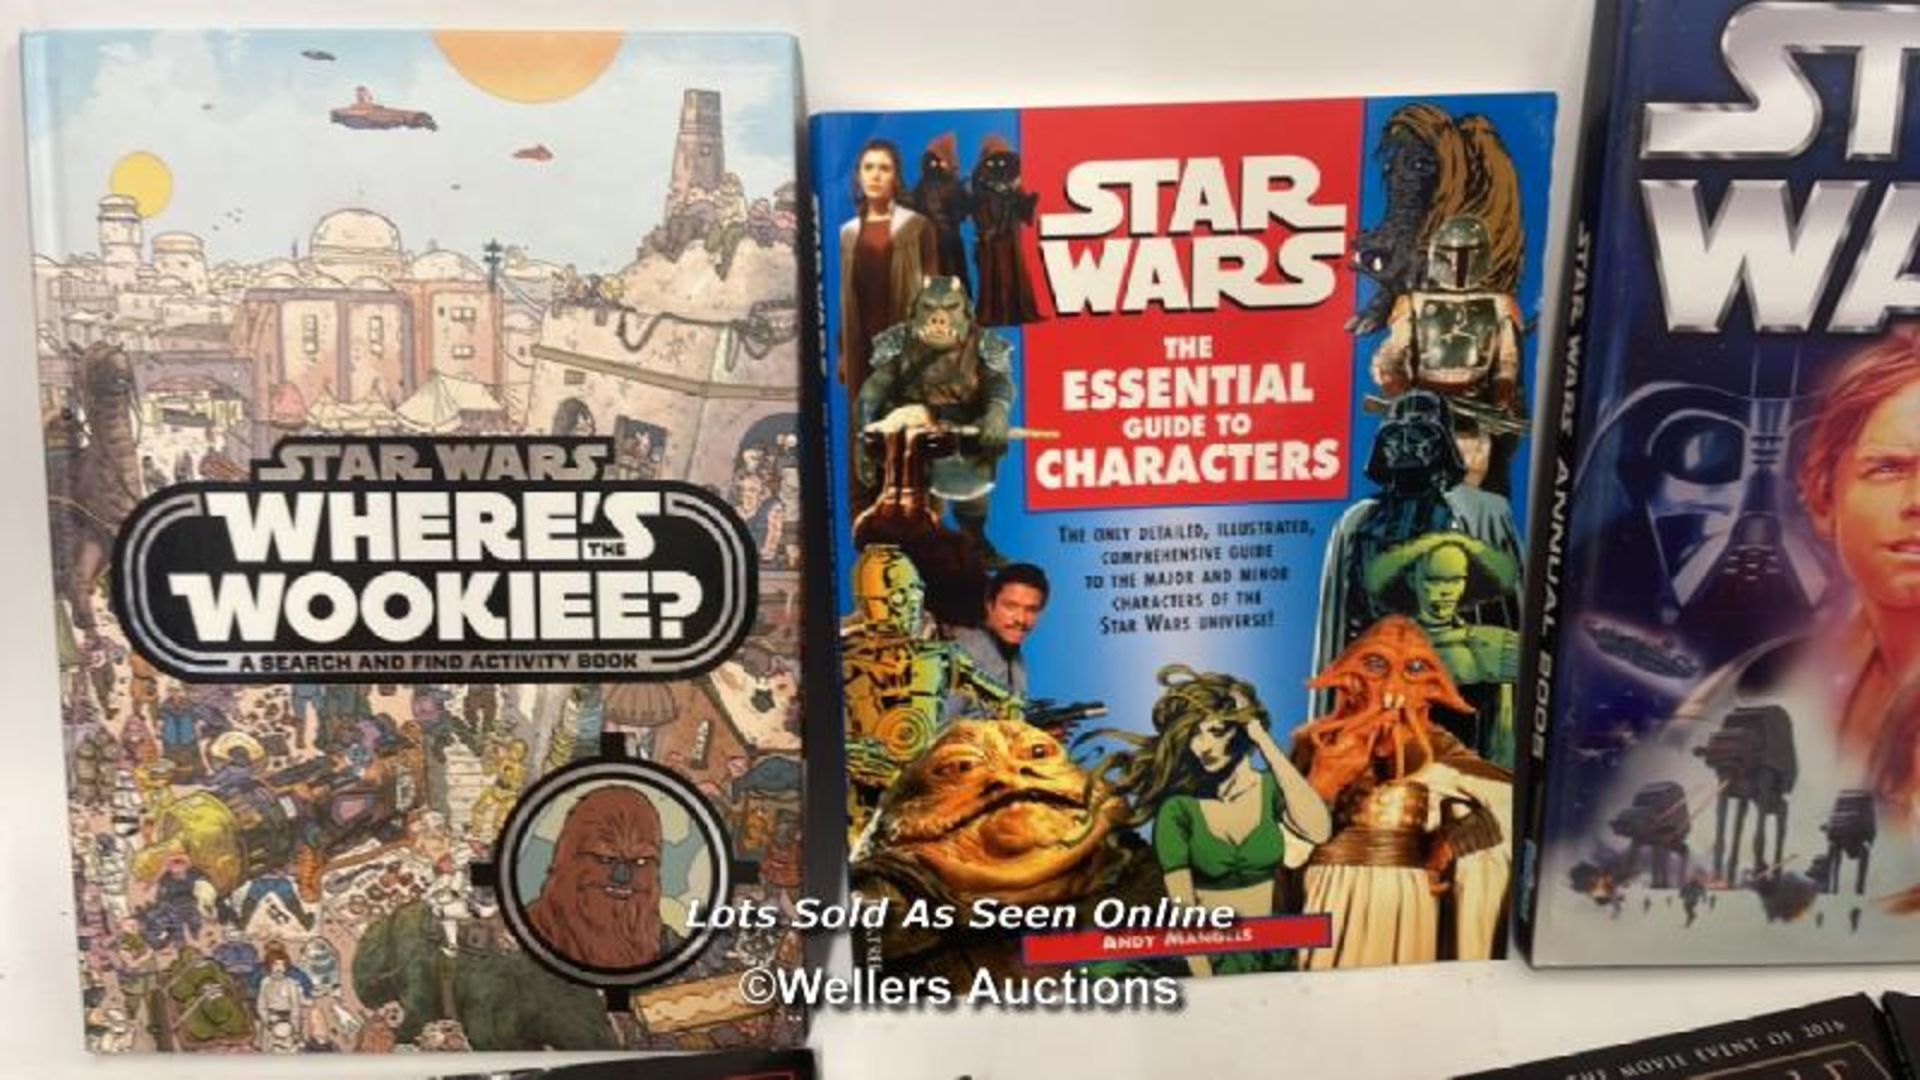 Star Wars books, annuals and calender including Star Wars Comics Art - Image 6 of 7